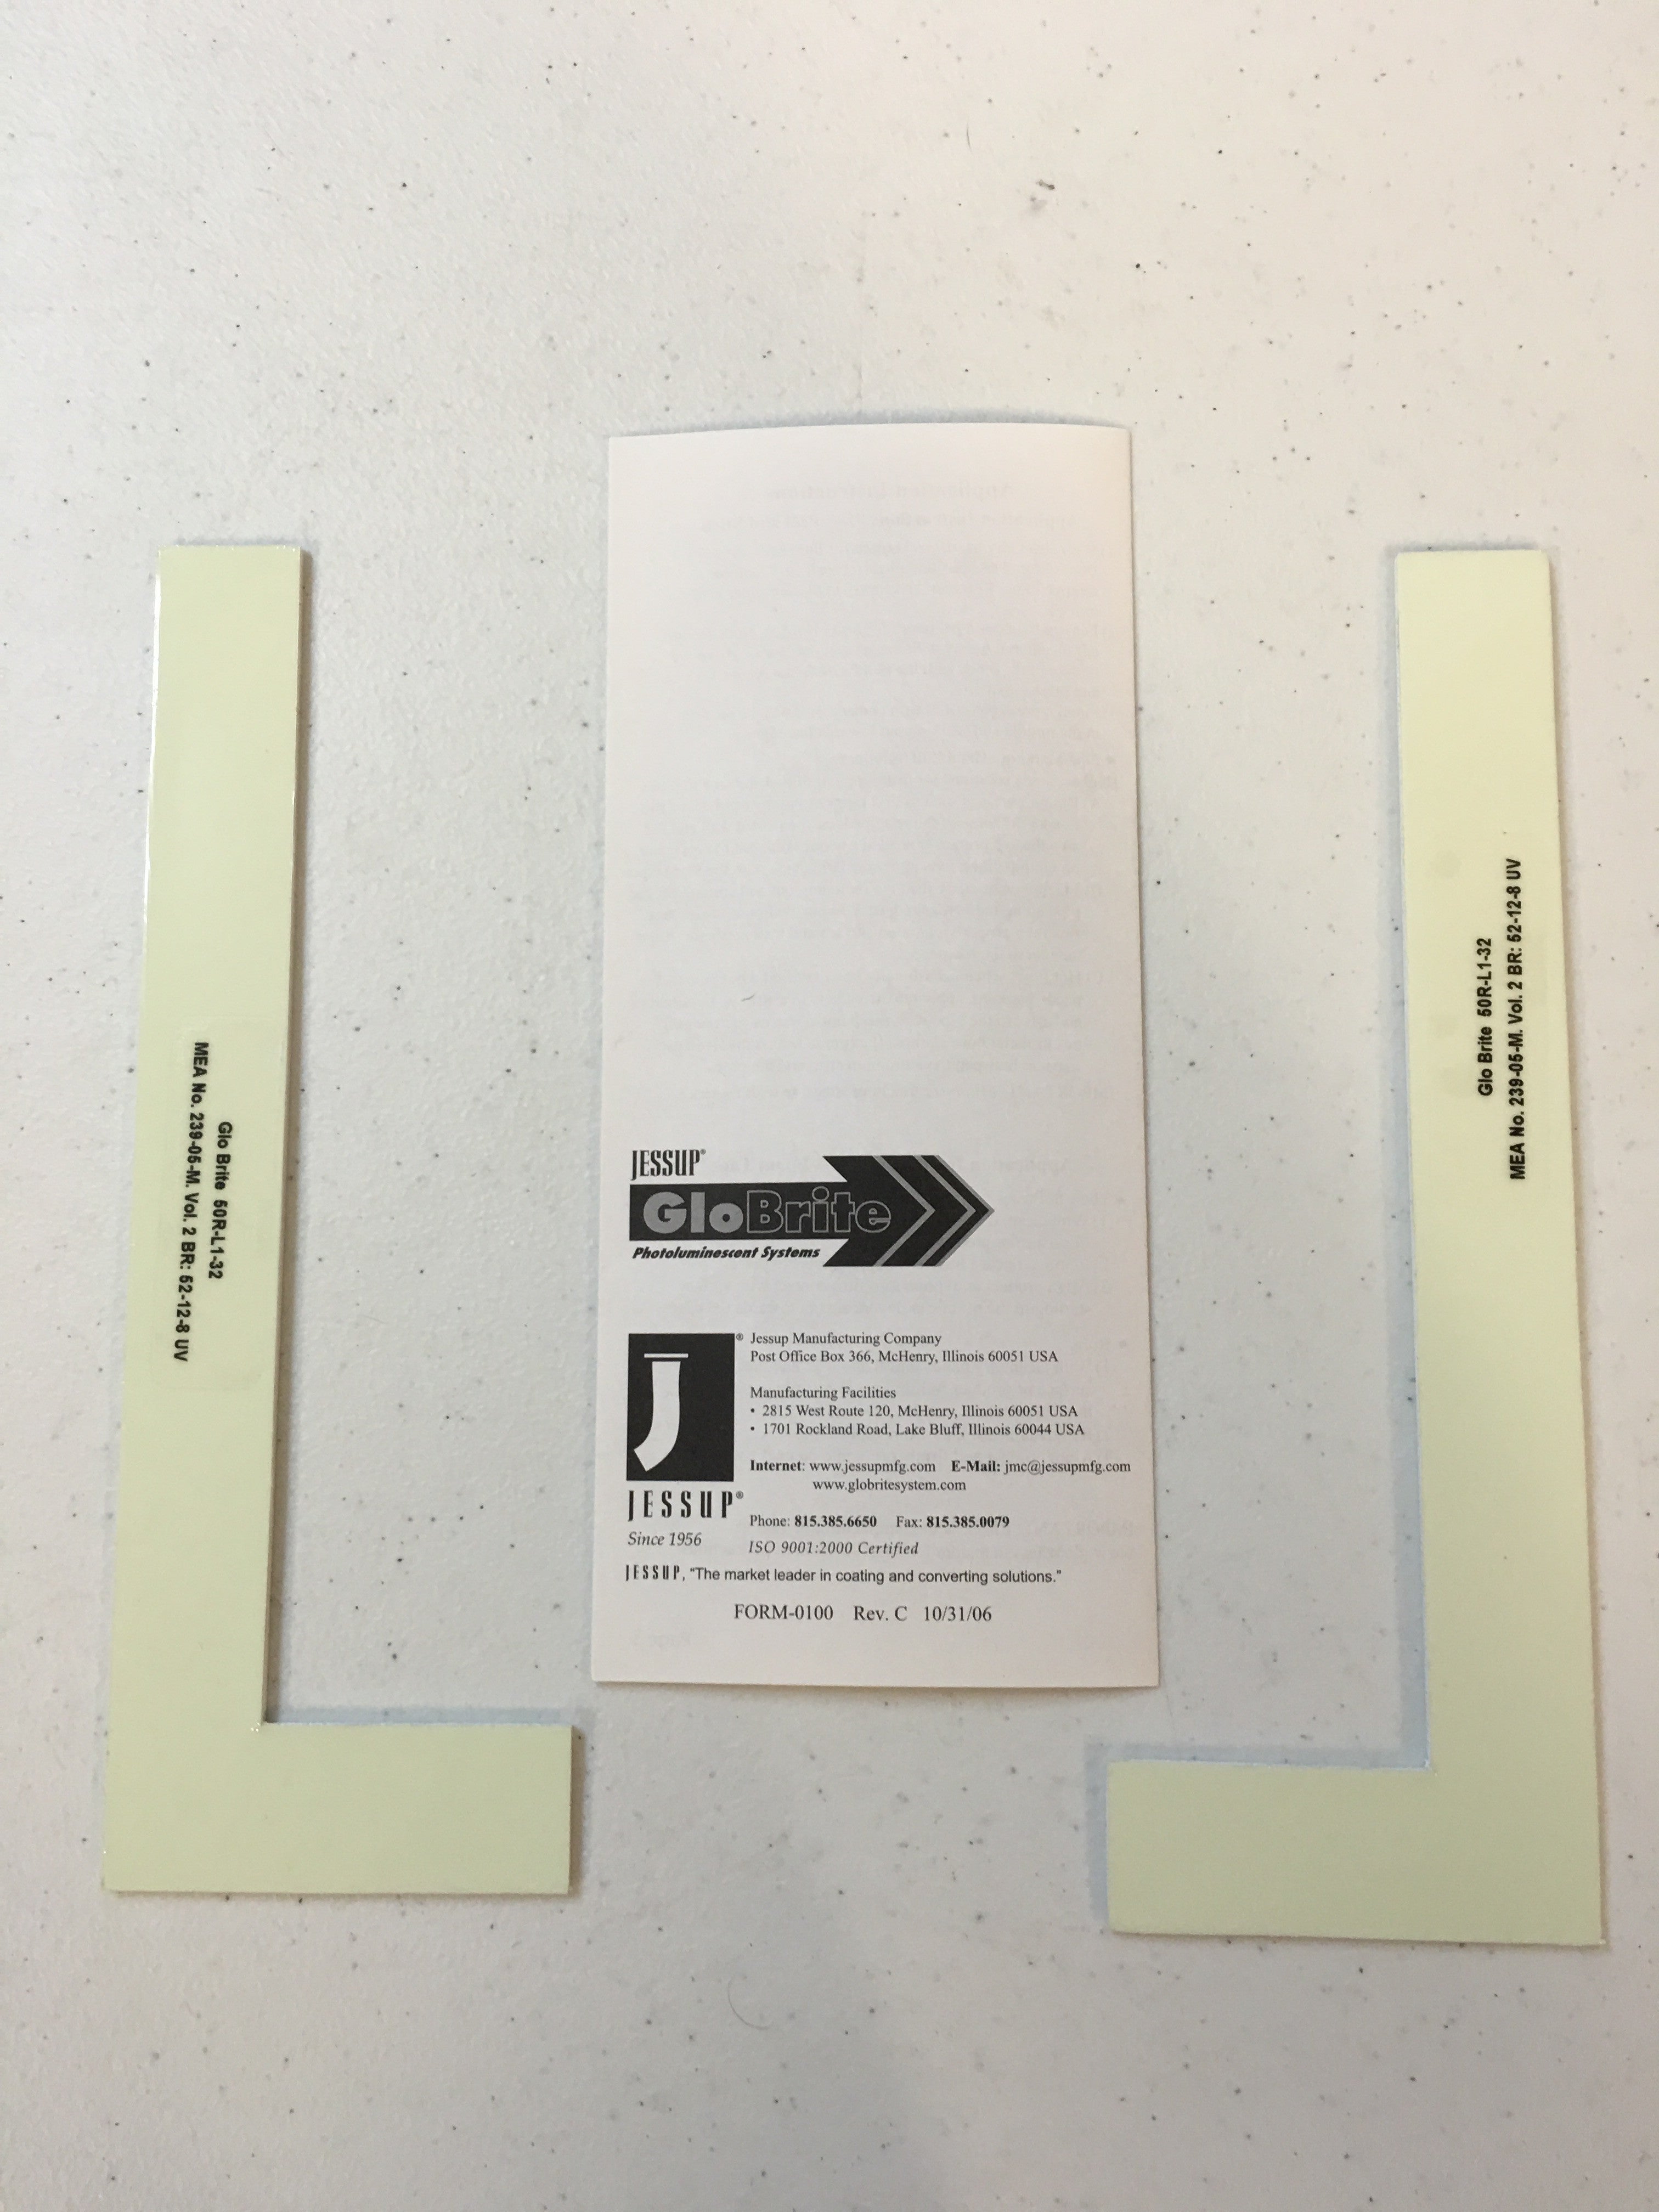 Meets New York City Construction Code MEA No. 239-05-M - 1" x 3" x 9" Set of L & R, GLOW IN THE DARK L Stair Marker with Foam Tape - 100 sets - SPECIAL ORDER - NO RETURN - 5-day processing